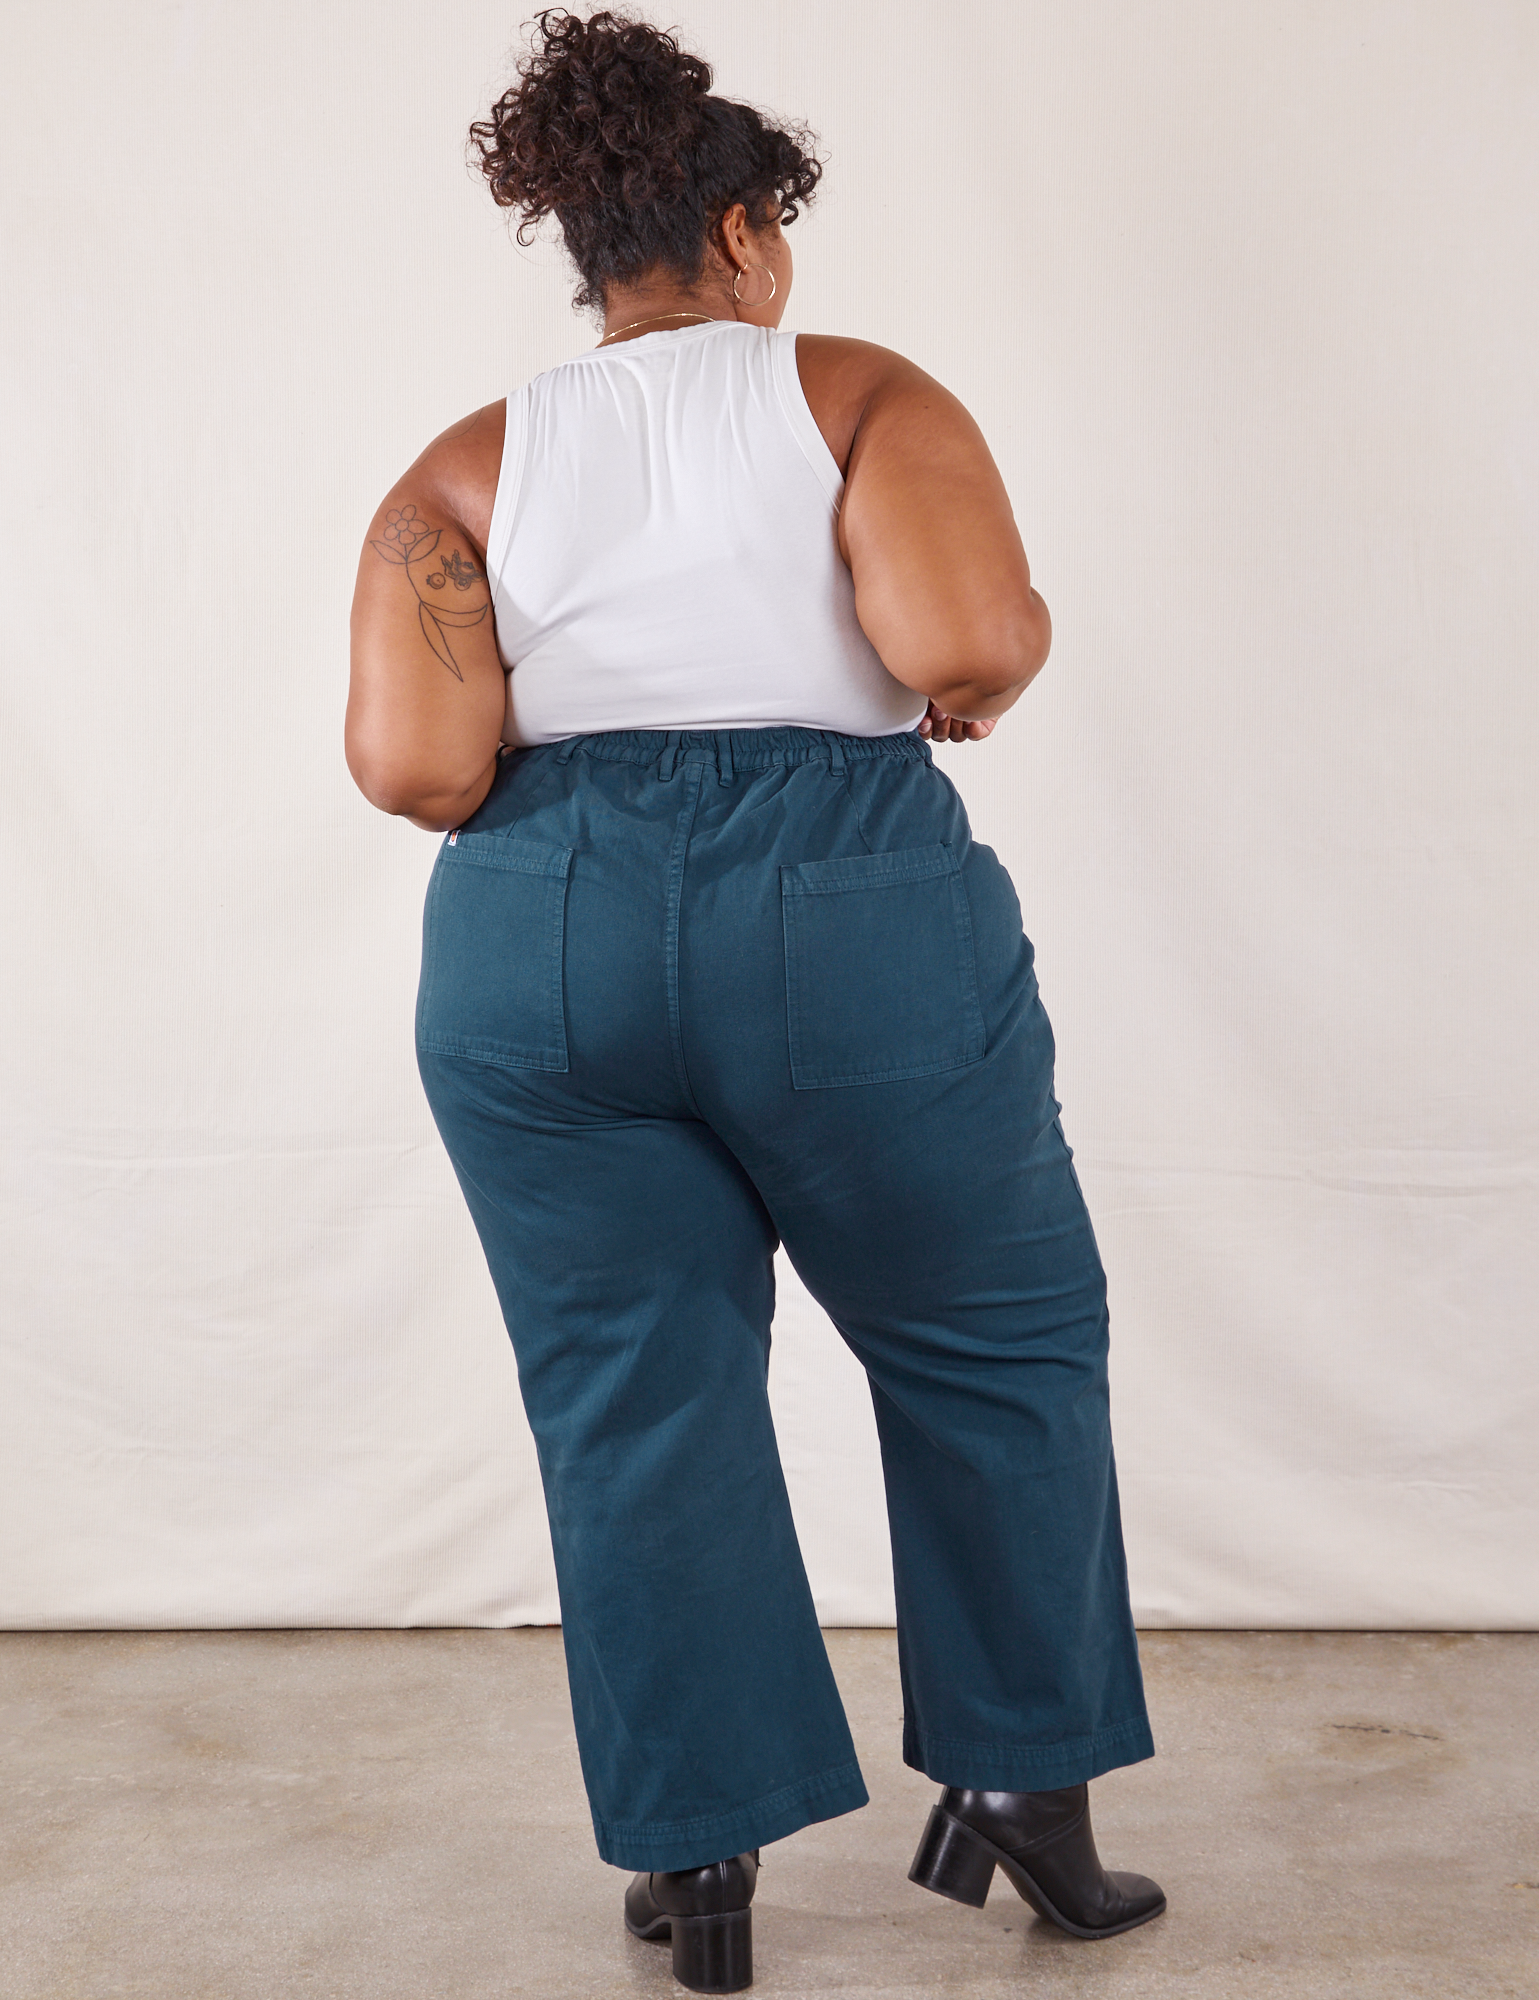 Back view of Western Pants in Lagoon and vintage tee off-white Tank Top on Morgan